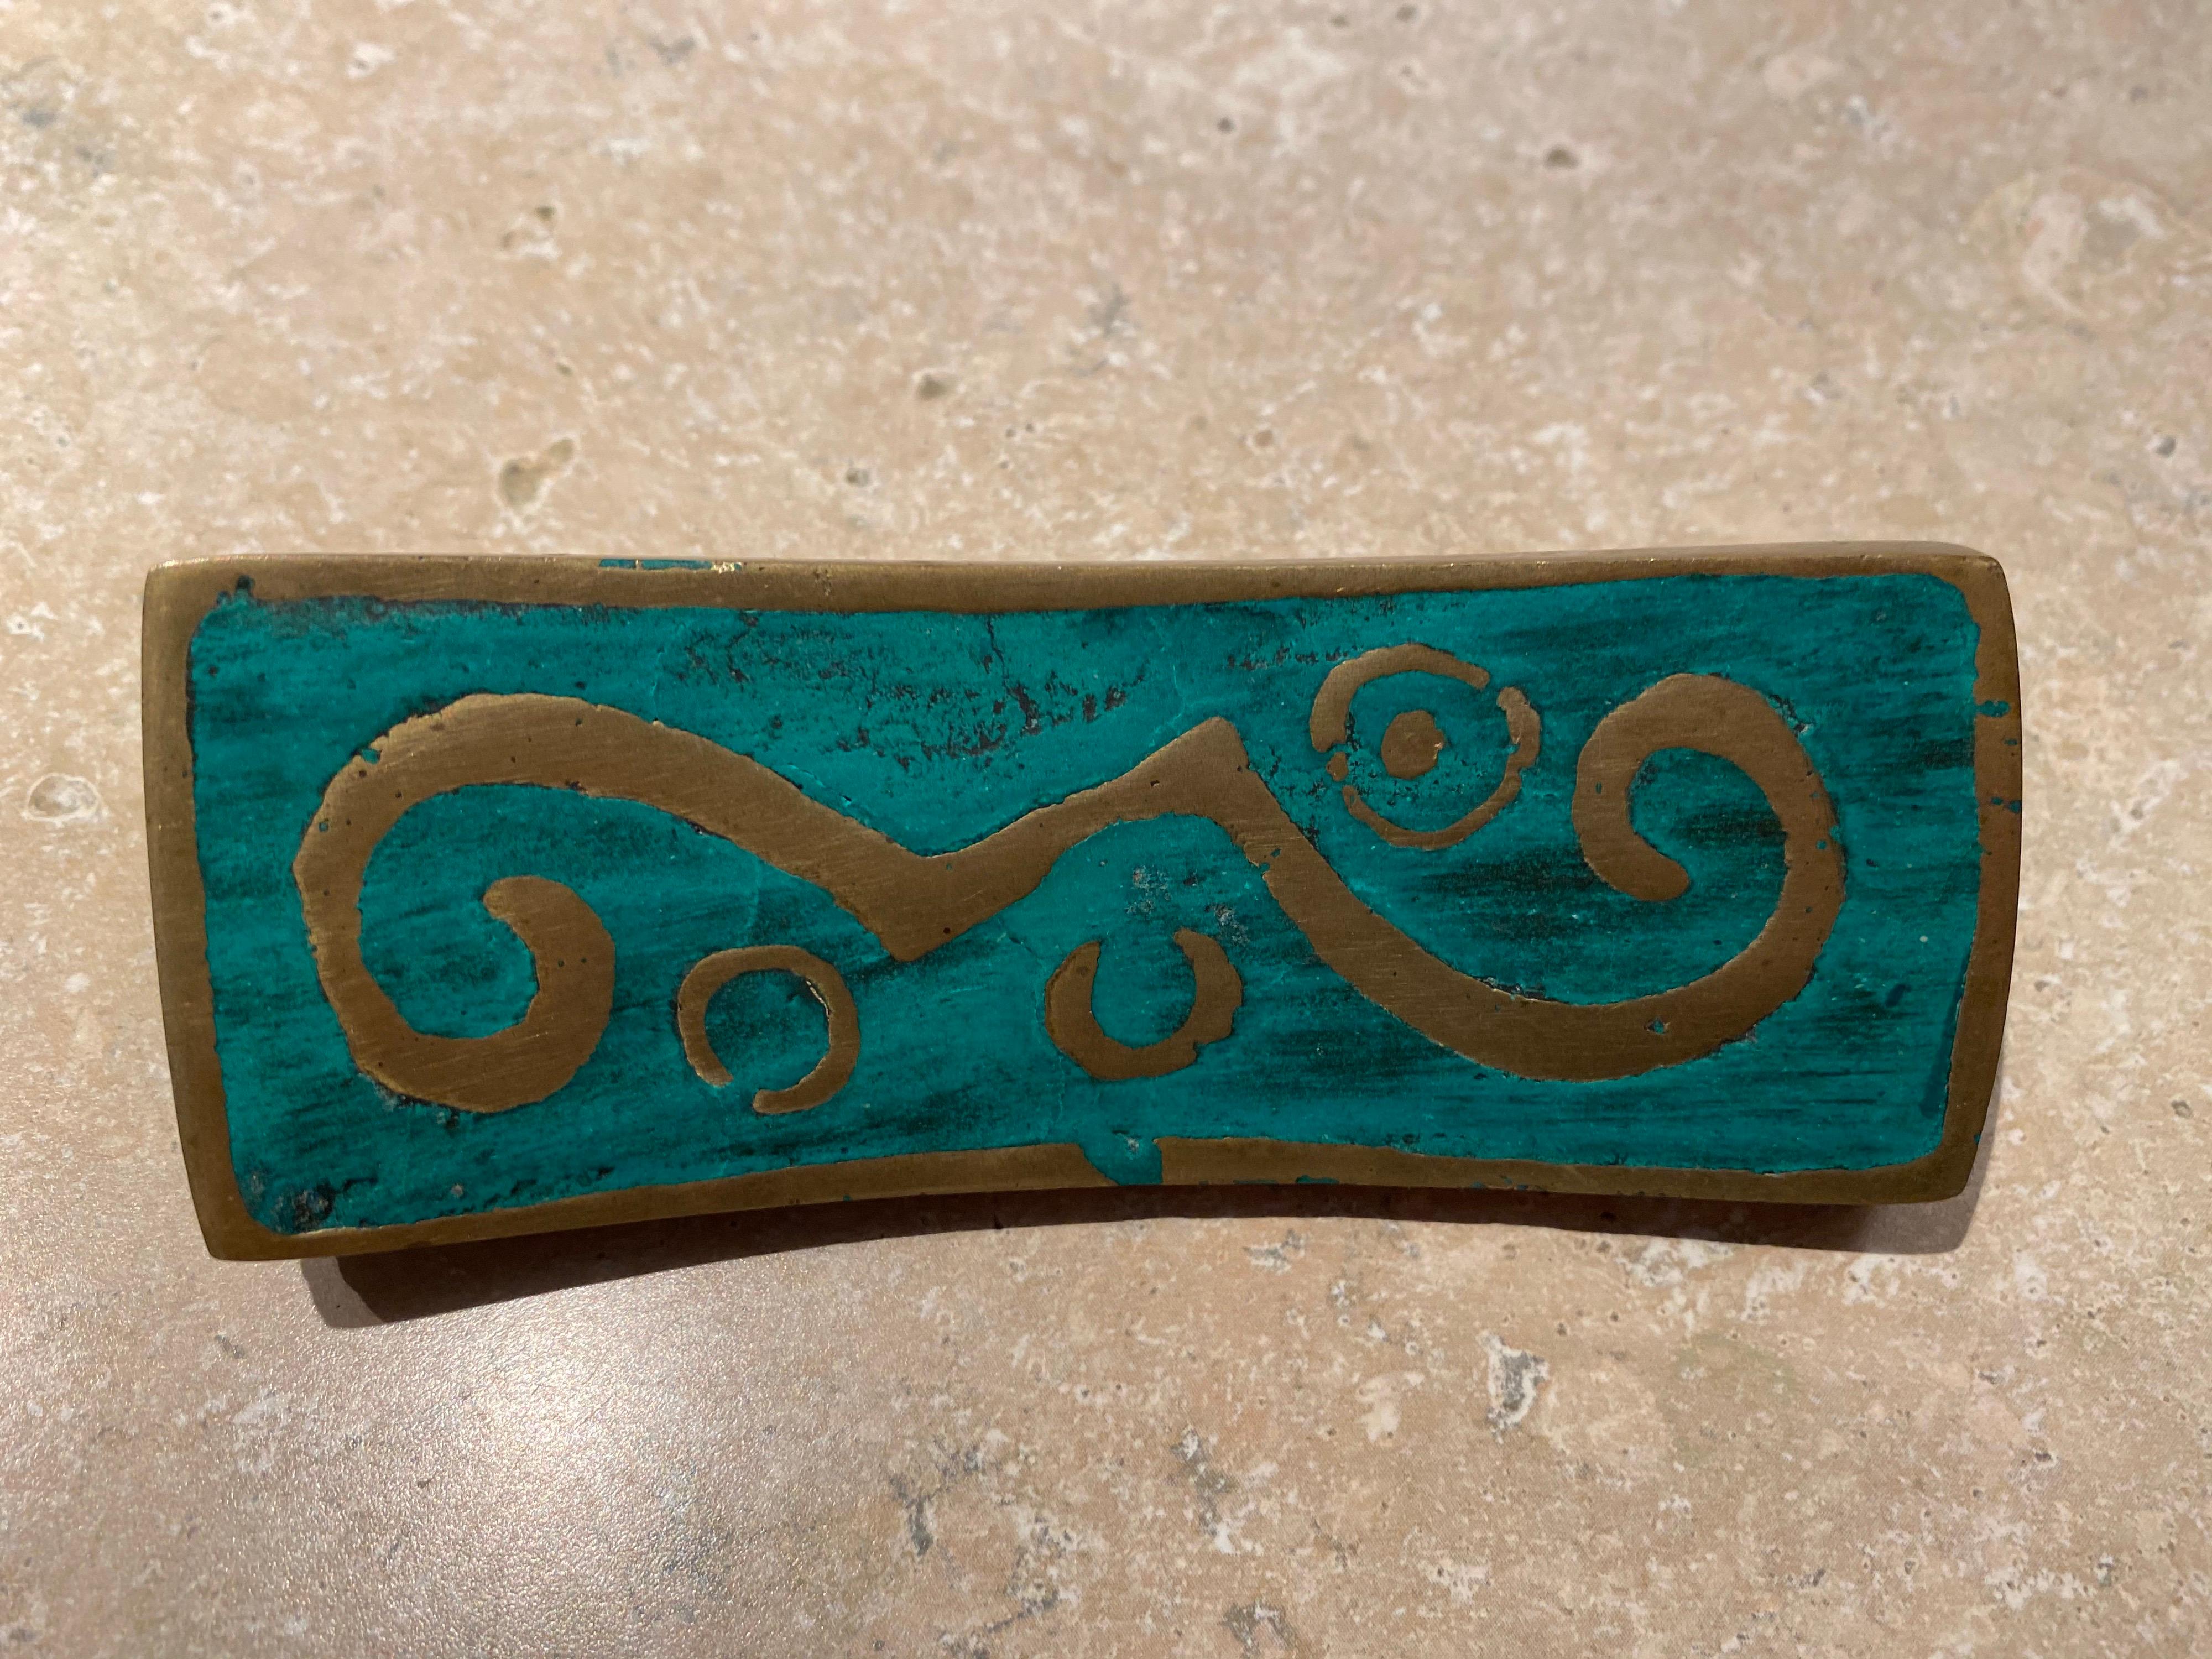 Gorgeous vintage Pepe Mendoza decorative brass pull handle with turquoise ceramic inlay.